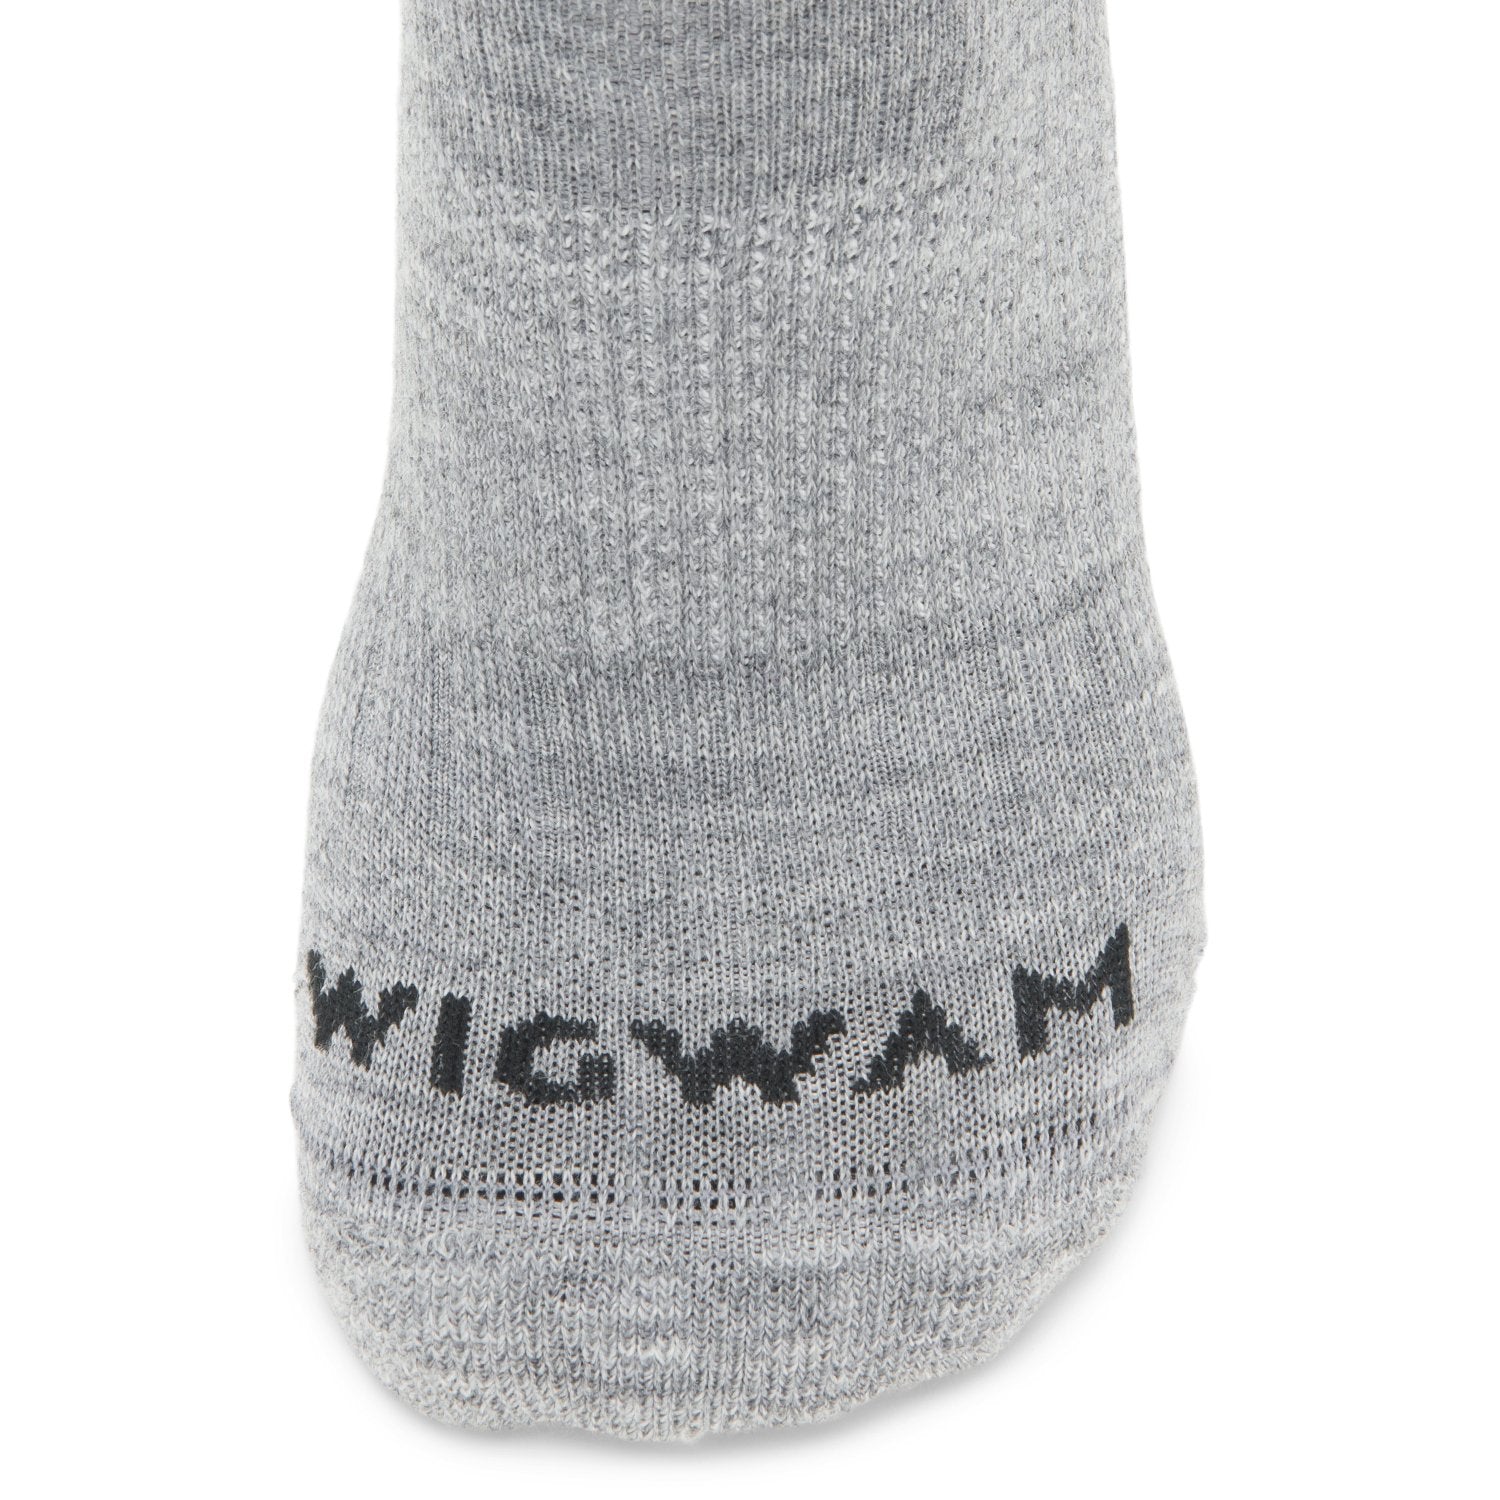 Axiom Lightweight Compression Crew Sock With Merino Wool - Grey toe perspective - made in The USA Wigwam Socks